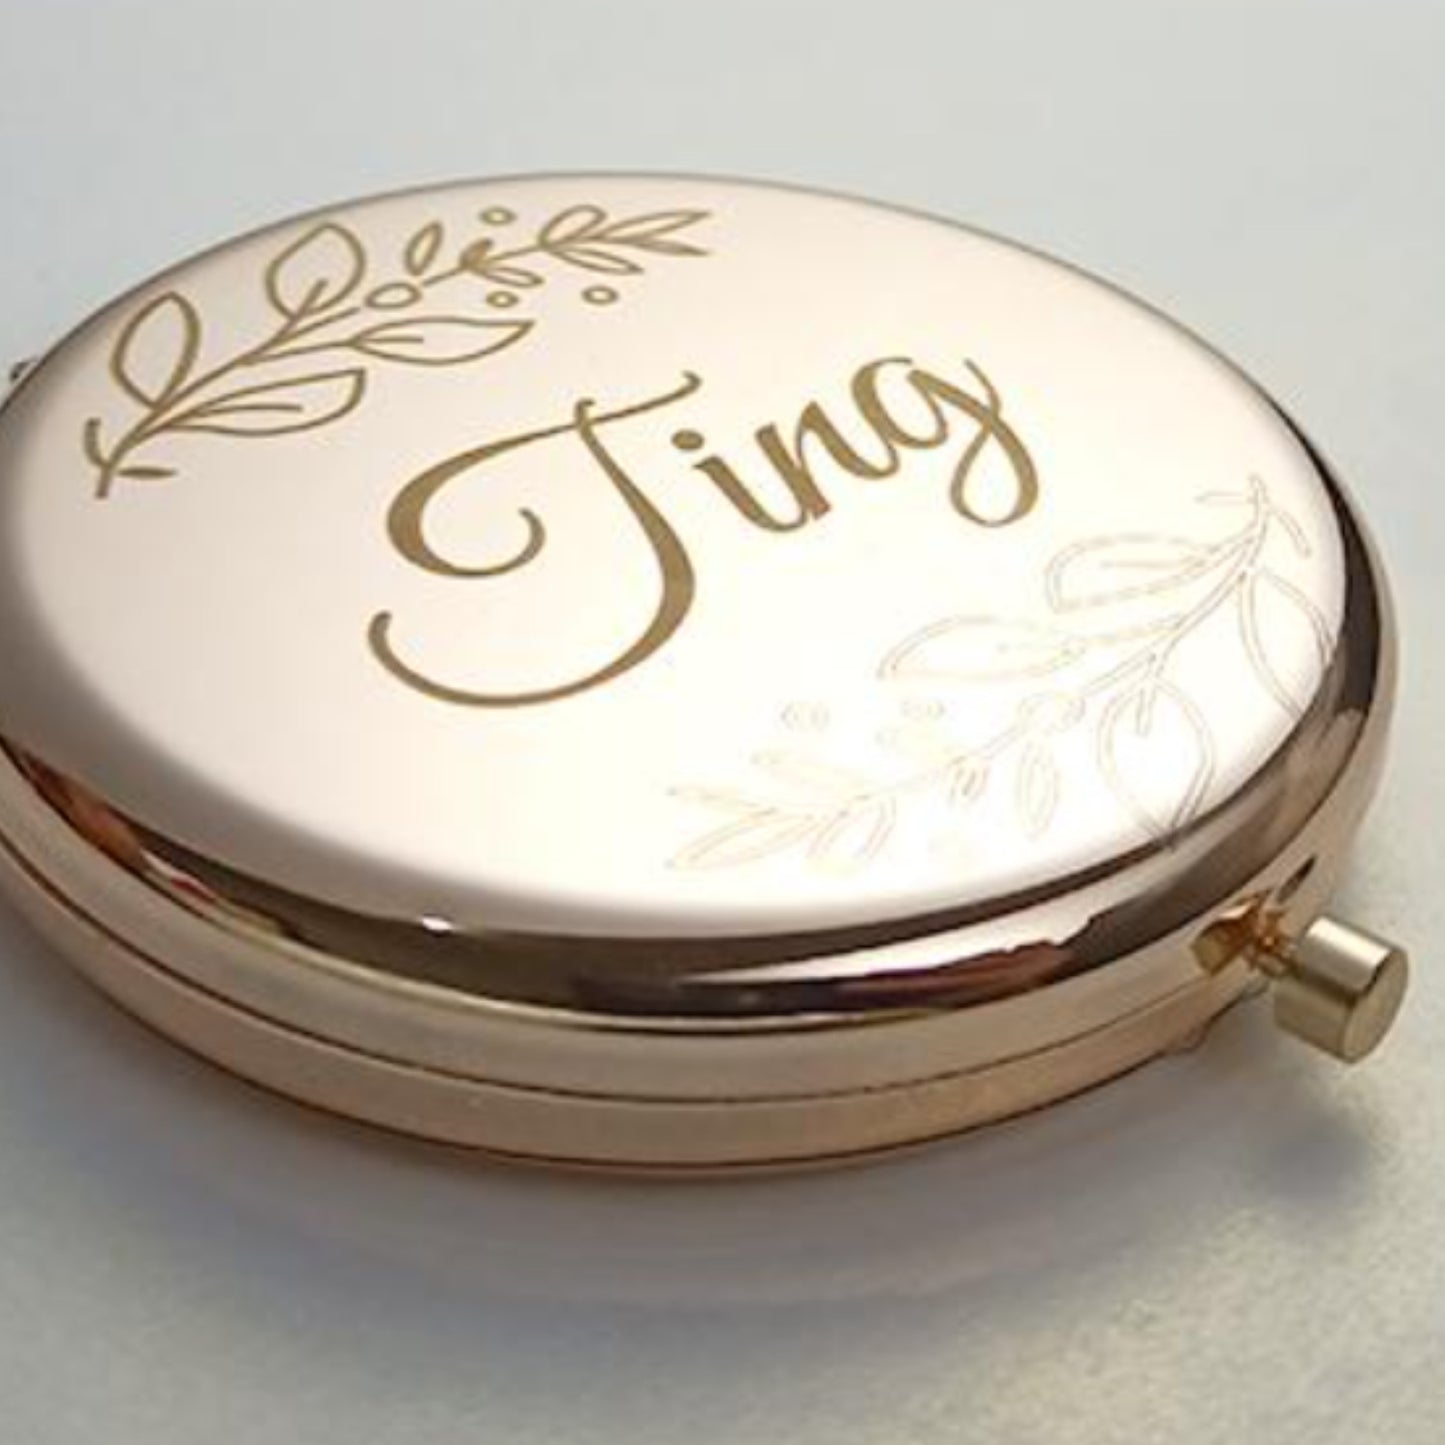 Personalized Engraved Compact Mirror - Name